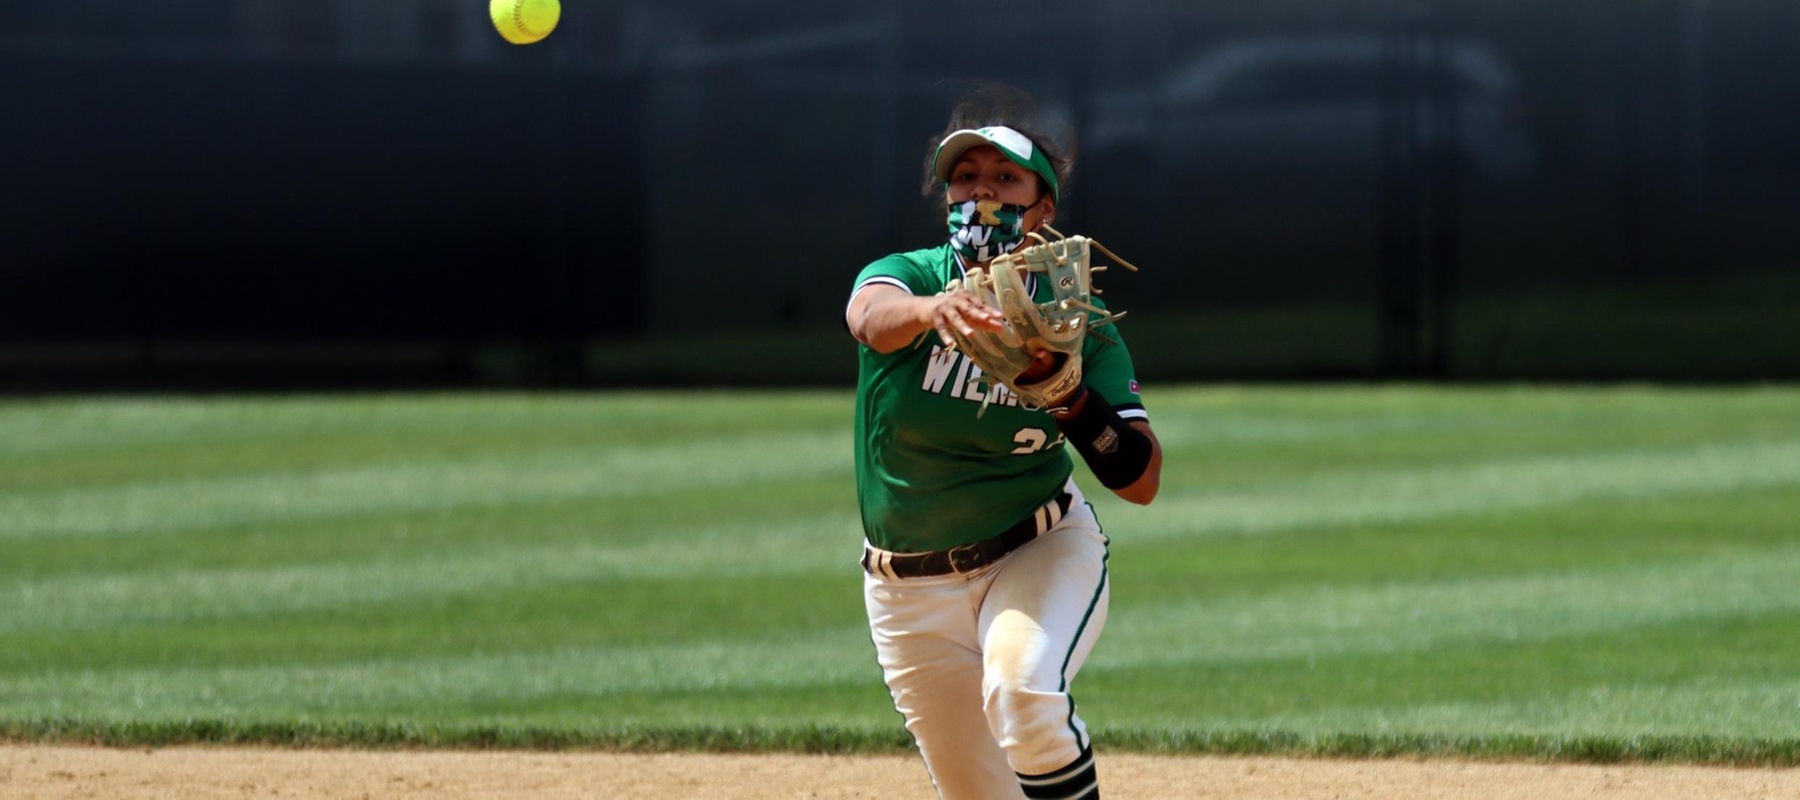 Photo of Alyssa Velasquez who had a hit and two stole bases on Monday. Copyright 2021; Wilmington University. All rights reserved. Photo by Erin Harvey.